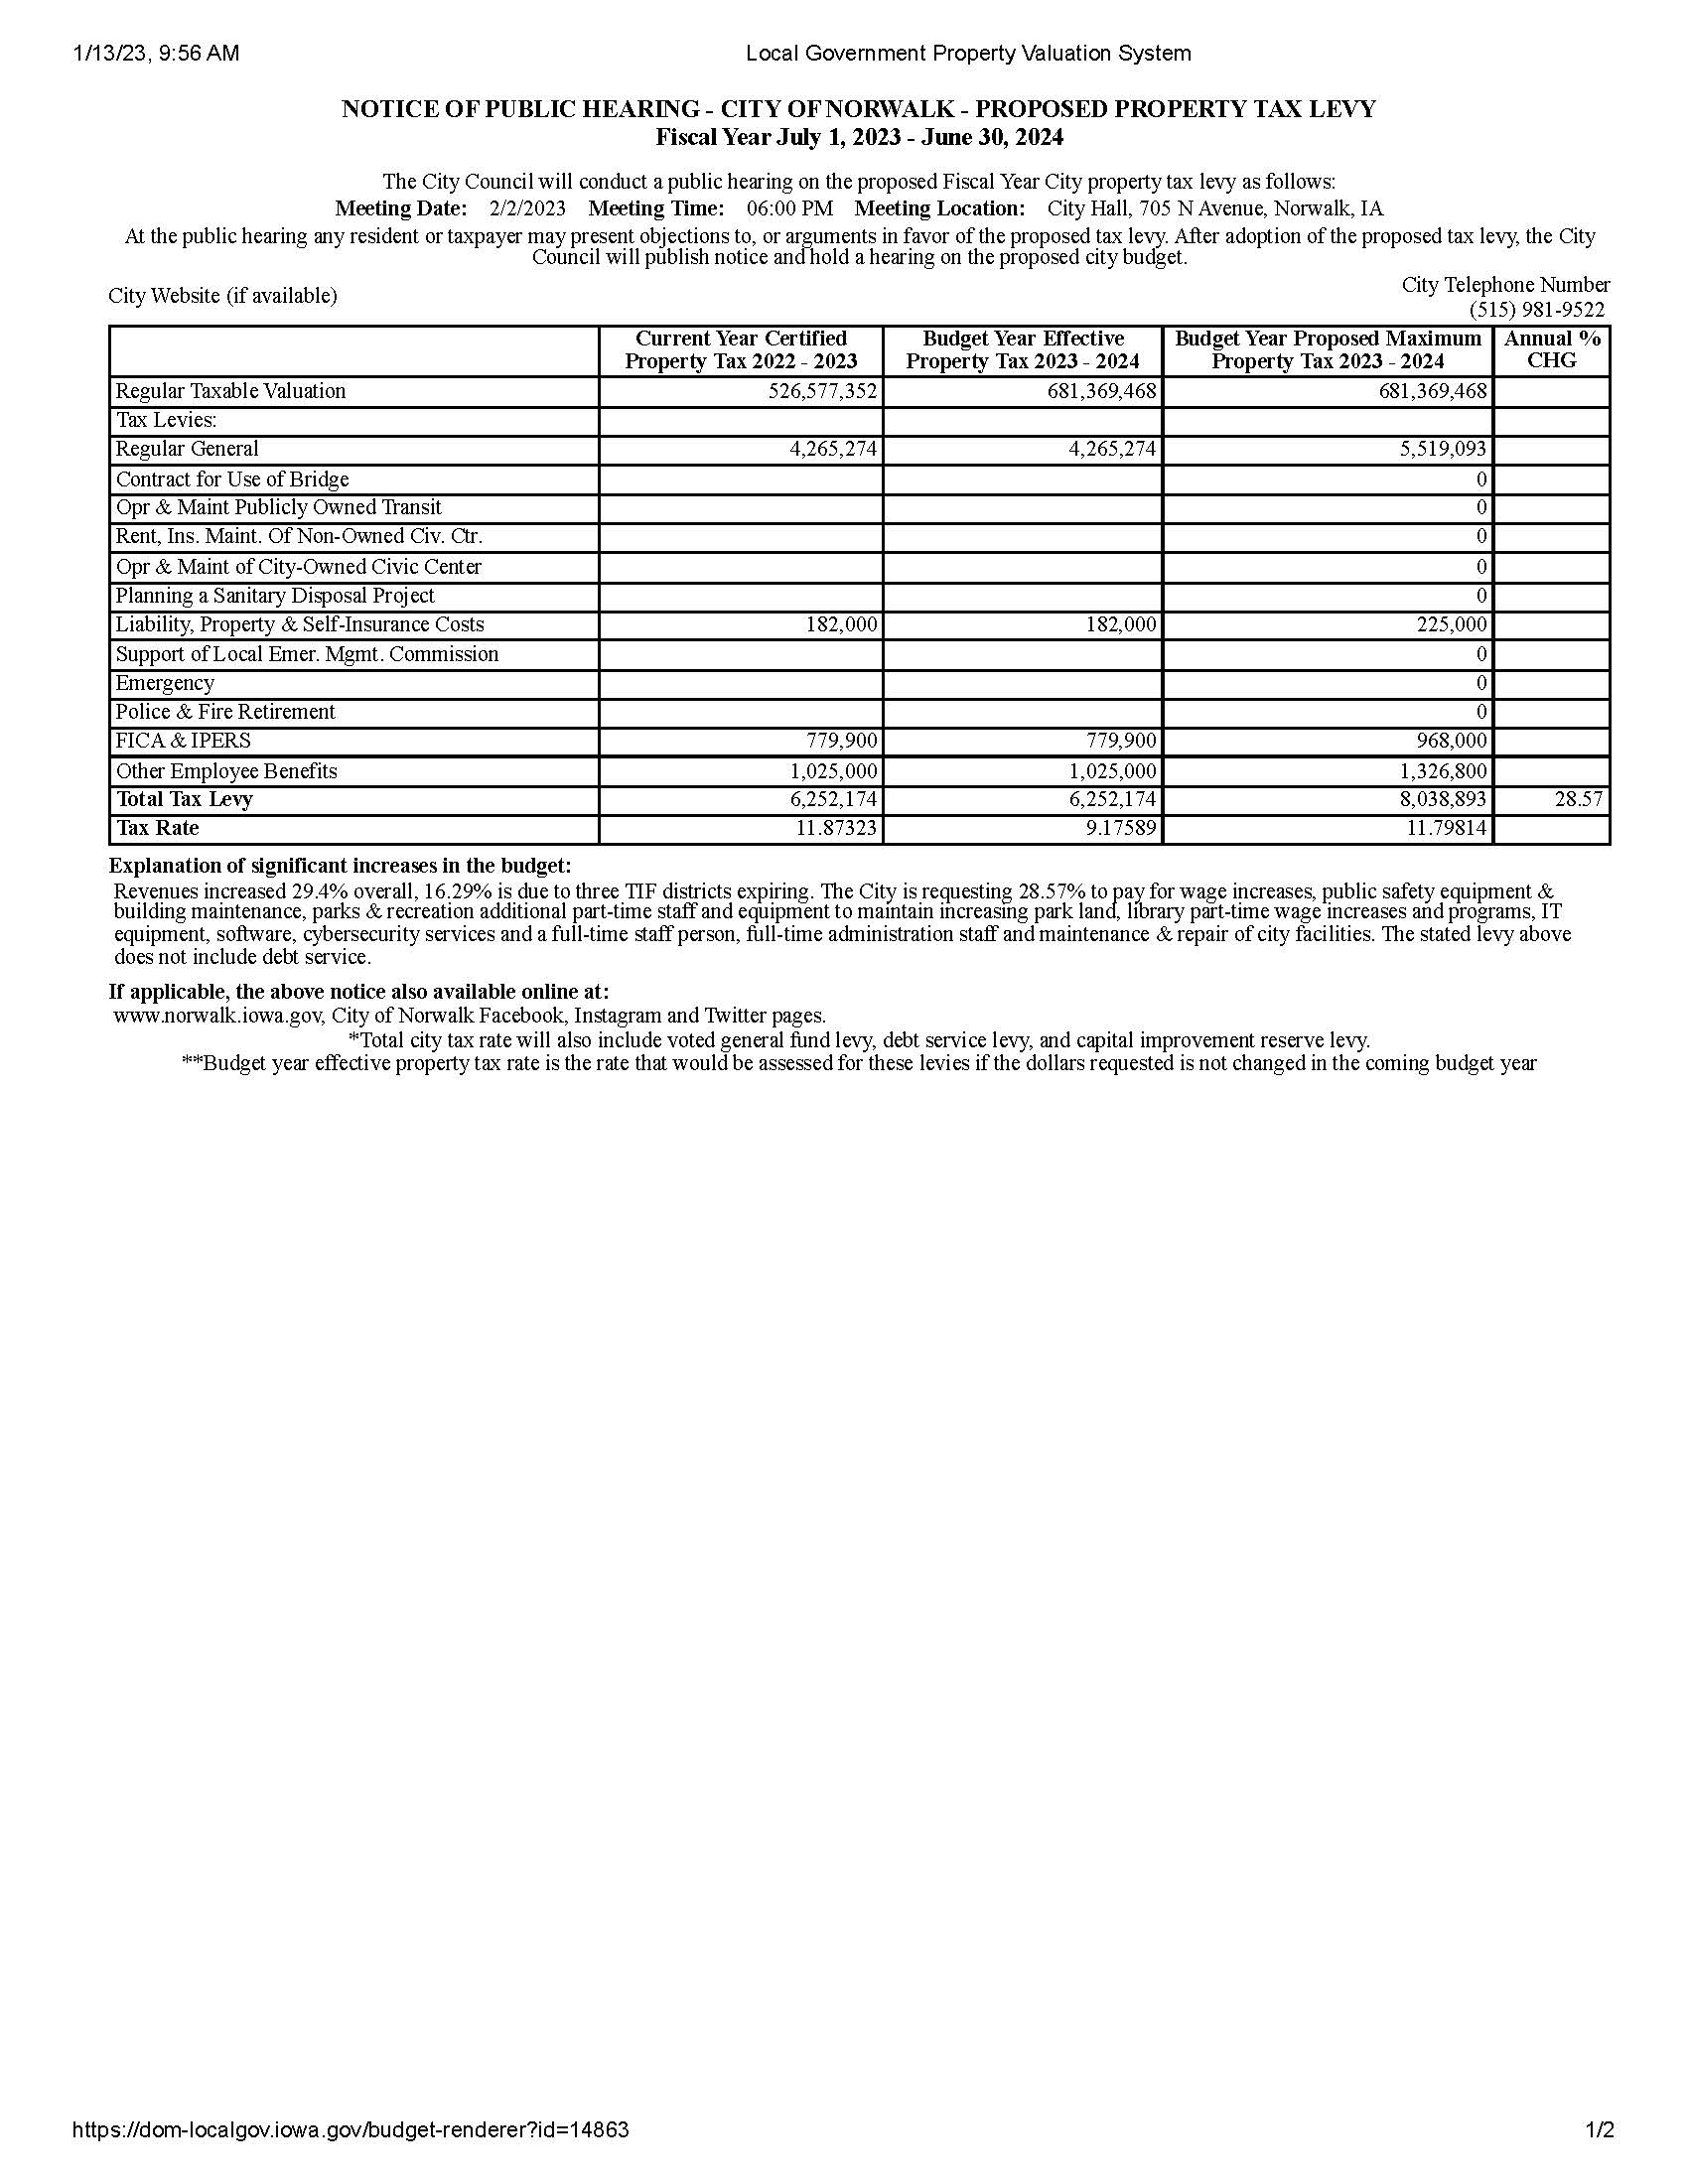 FY24 Proposed Maximum Property Tax levy (1)_Page_1